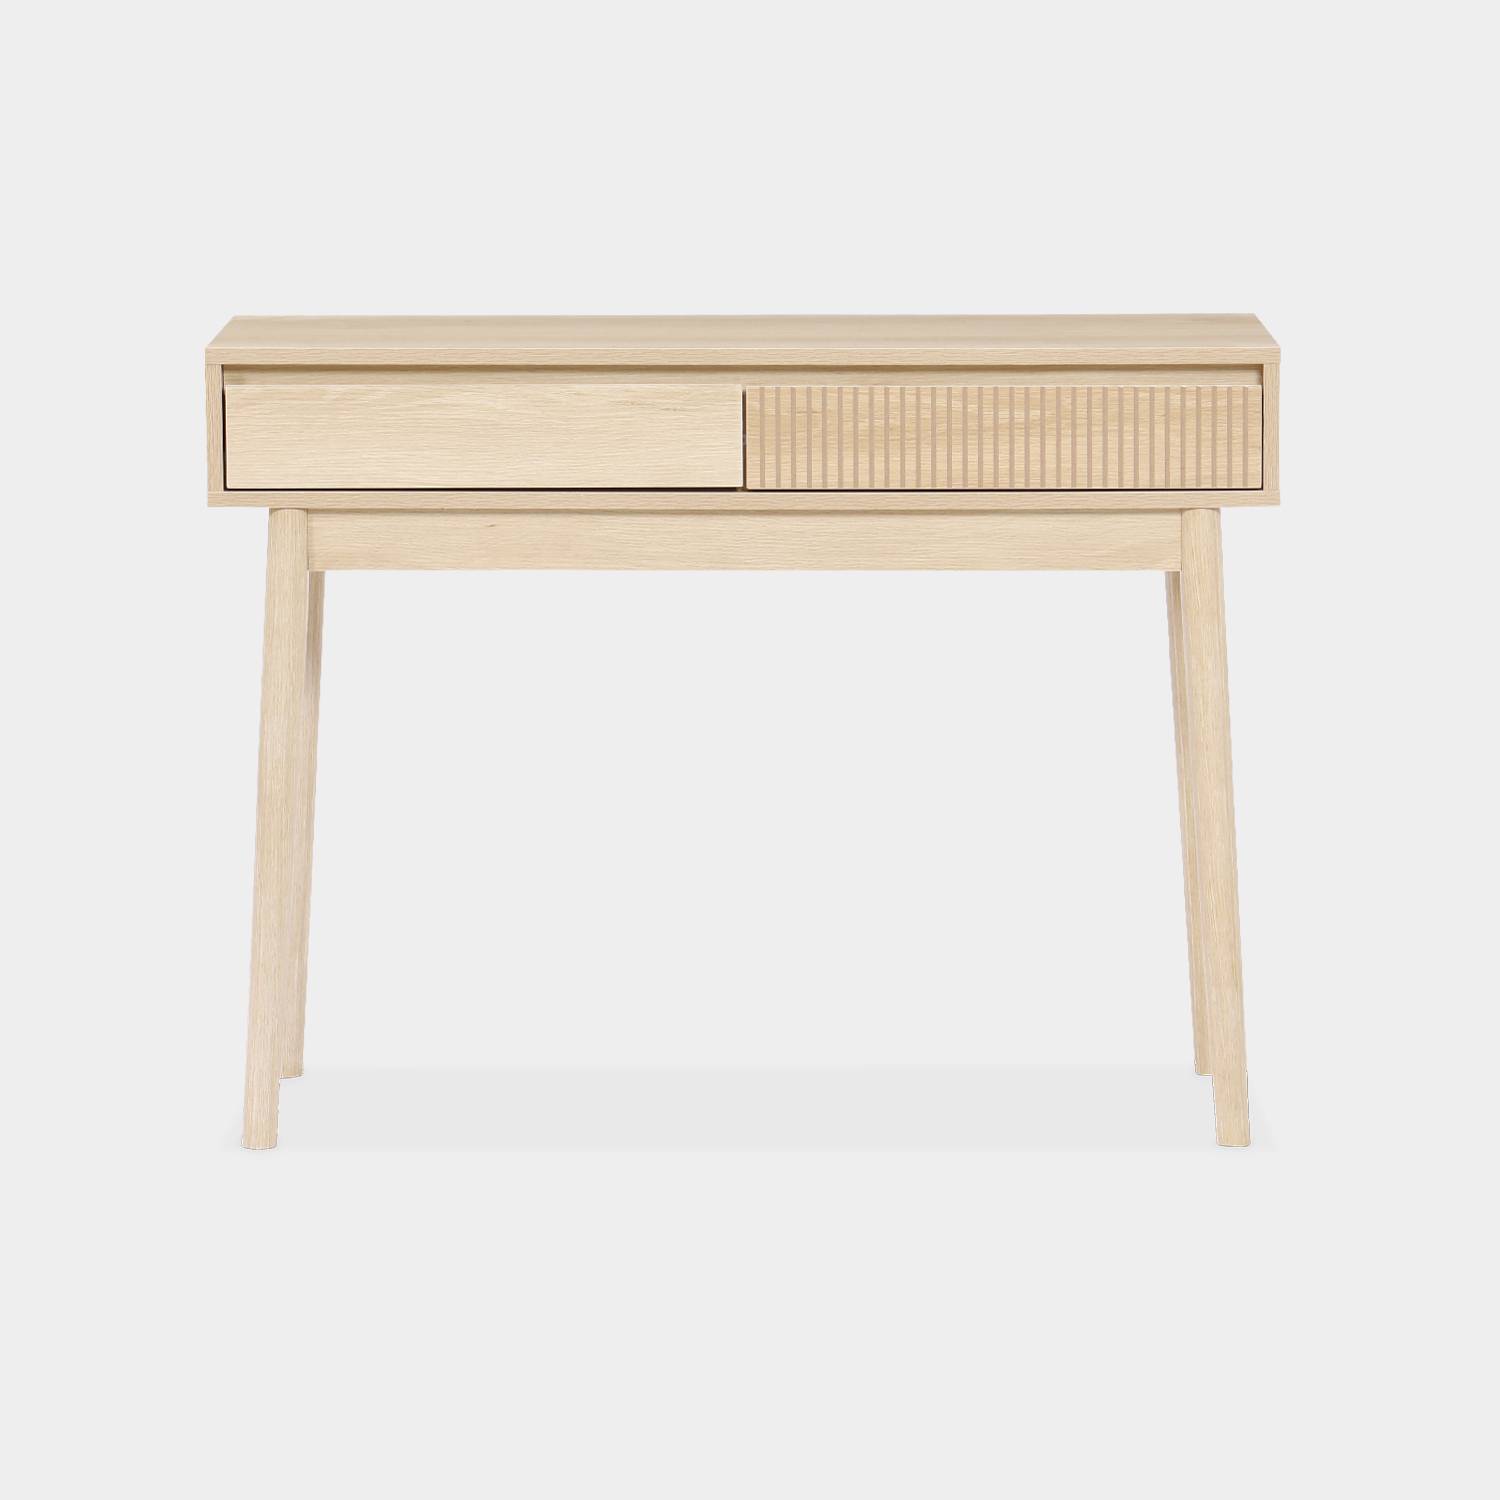 Grooved wood detail console table, 100x30x75cm, Linear, Natural wood colour Photo4